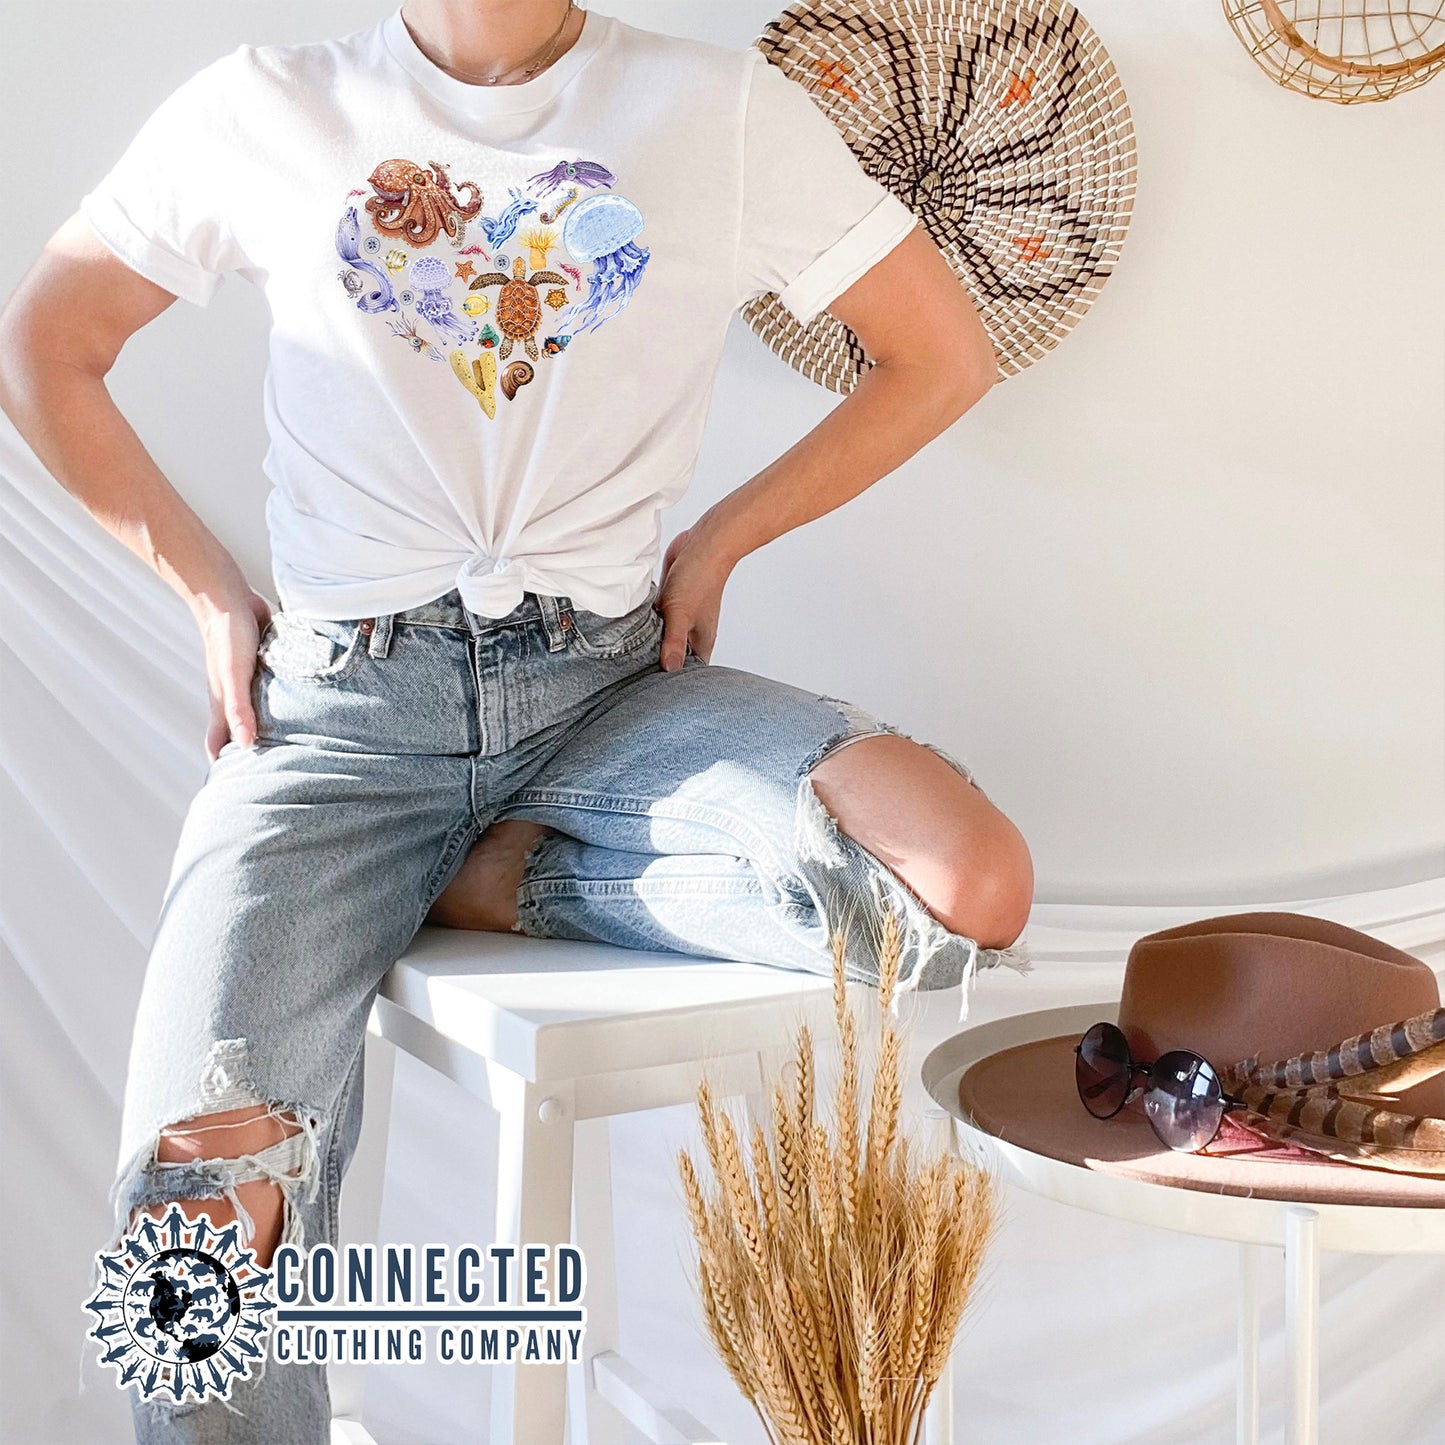 Ocean Sea Creatures Heart Short-Sleeve Tee - sweetsherriloudesigns - Ethical and Sustainable Clothing That Gives Back - 10% donated to Mission Blue ocean conservation